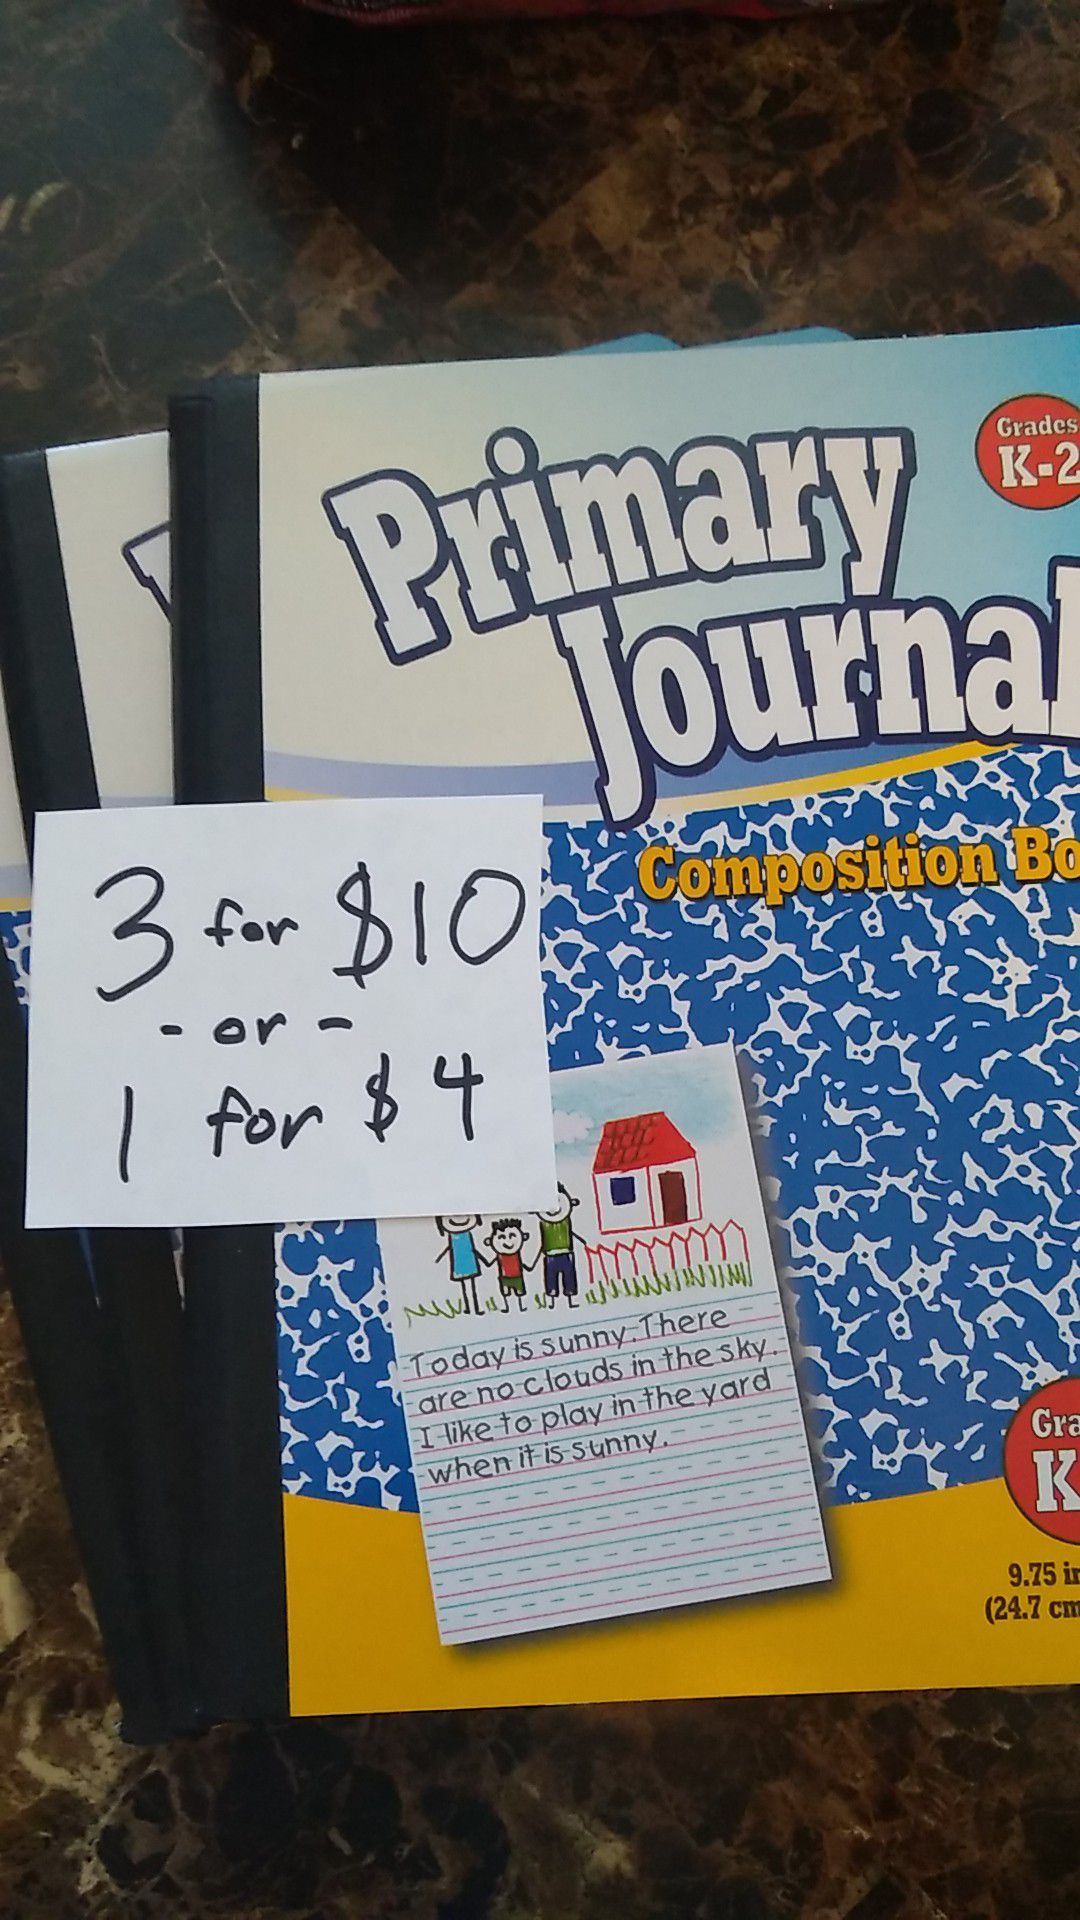 3 for $10 / 1 for $4 Primary Journal Composition Books